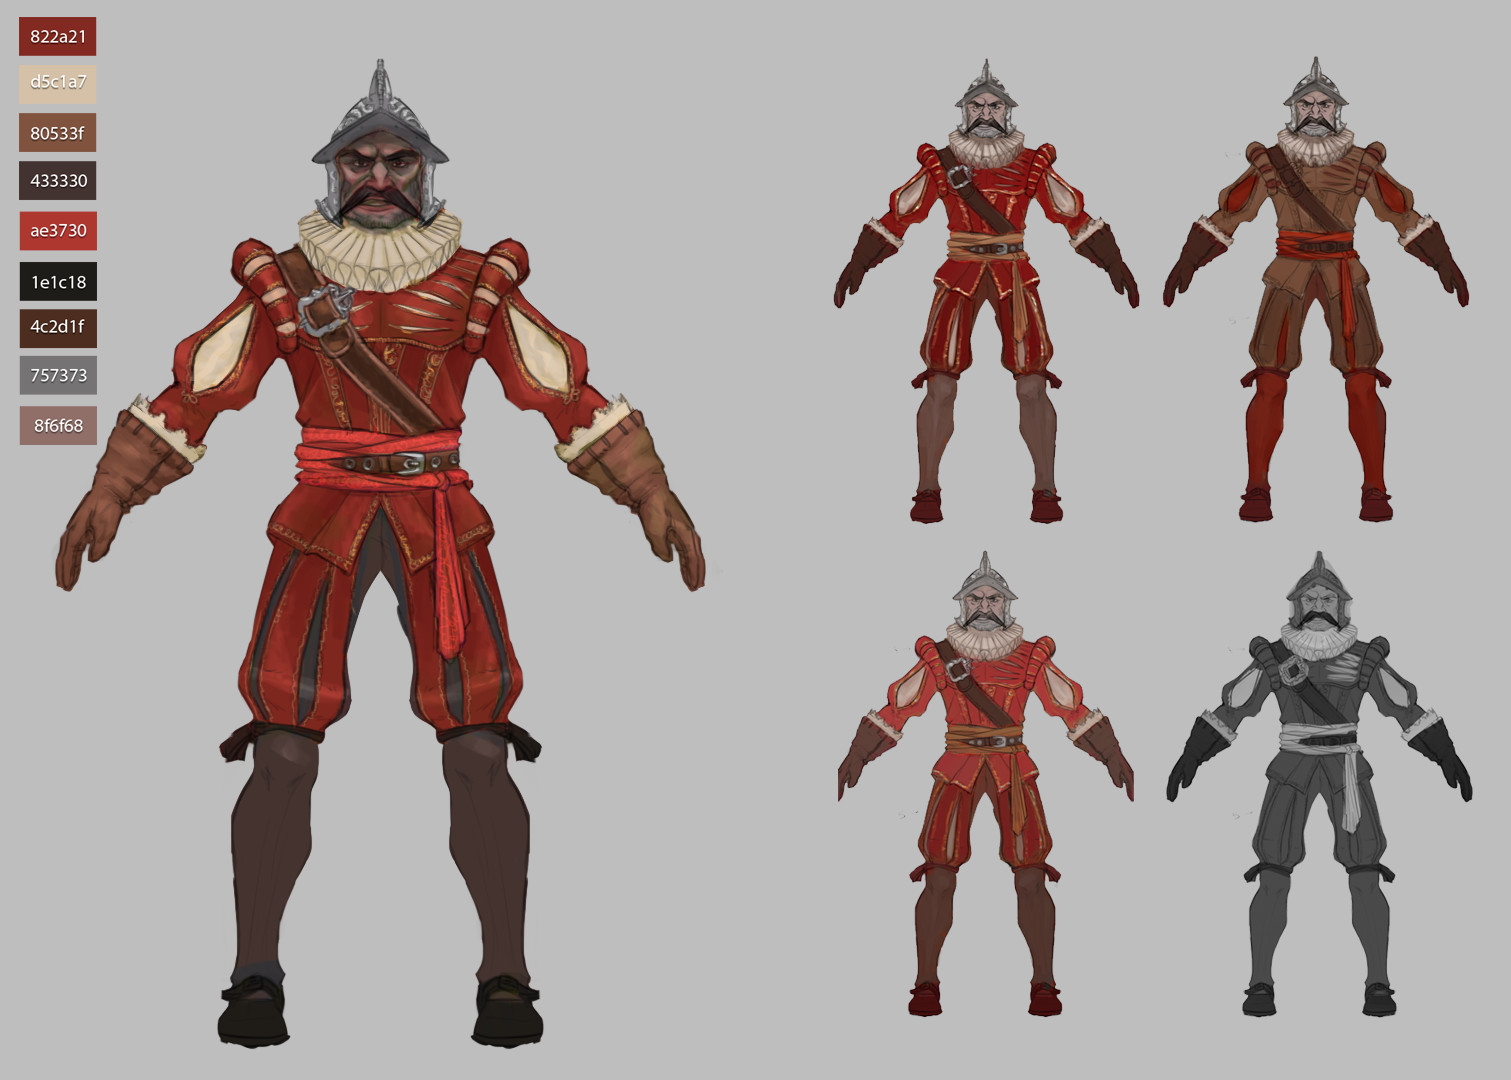 After seeing the origial colors in engine we changed the guard's palette.